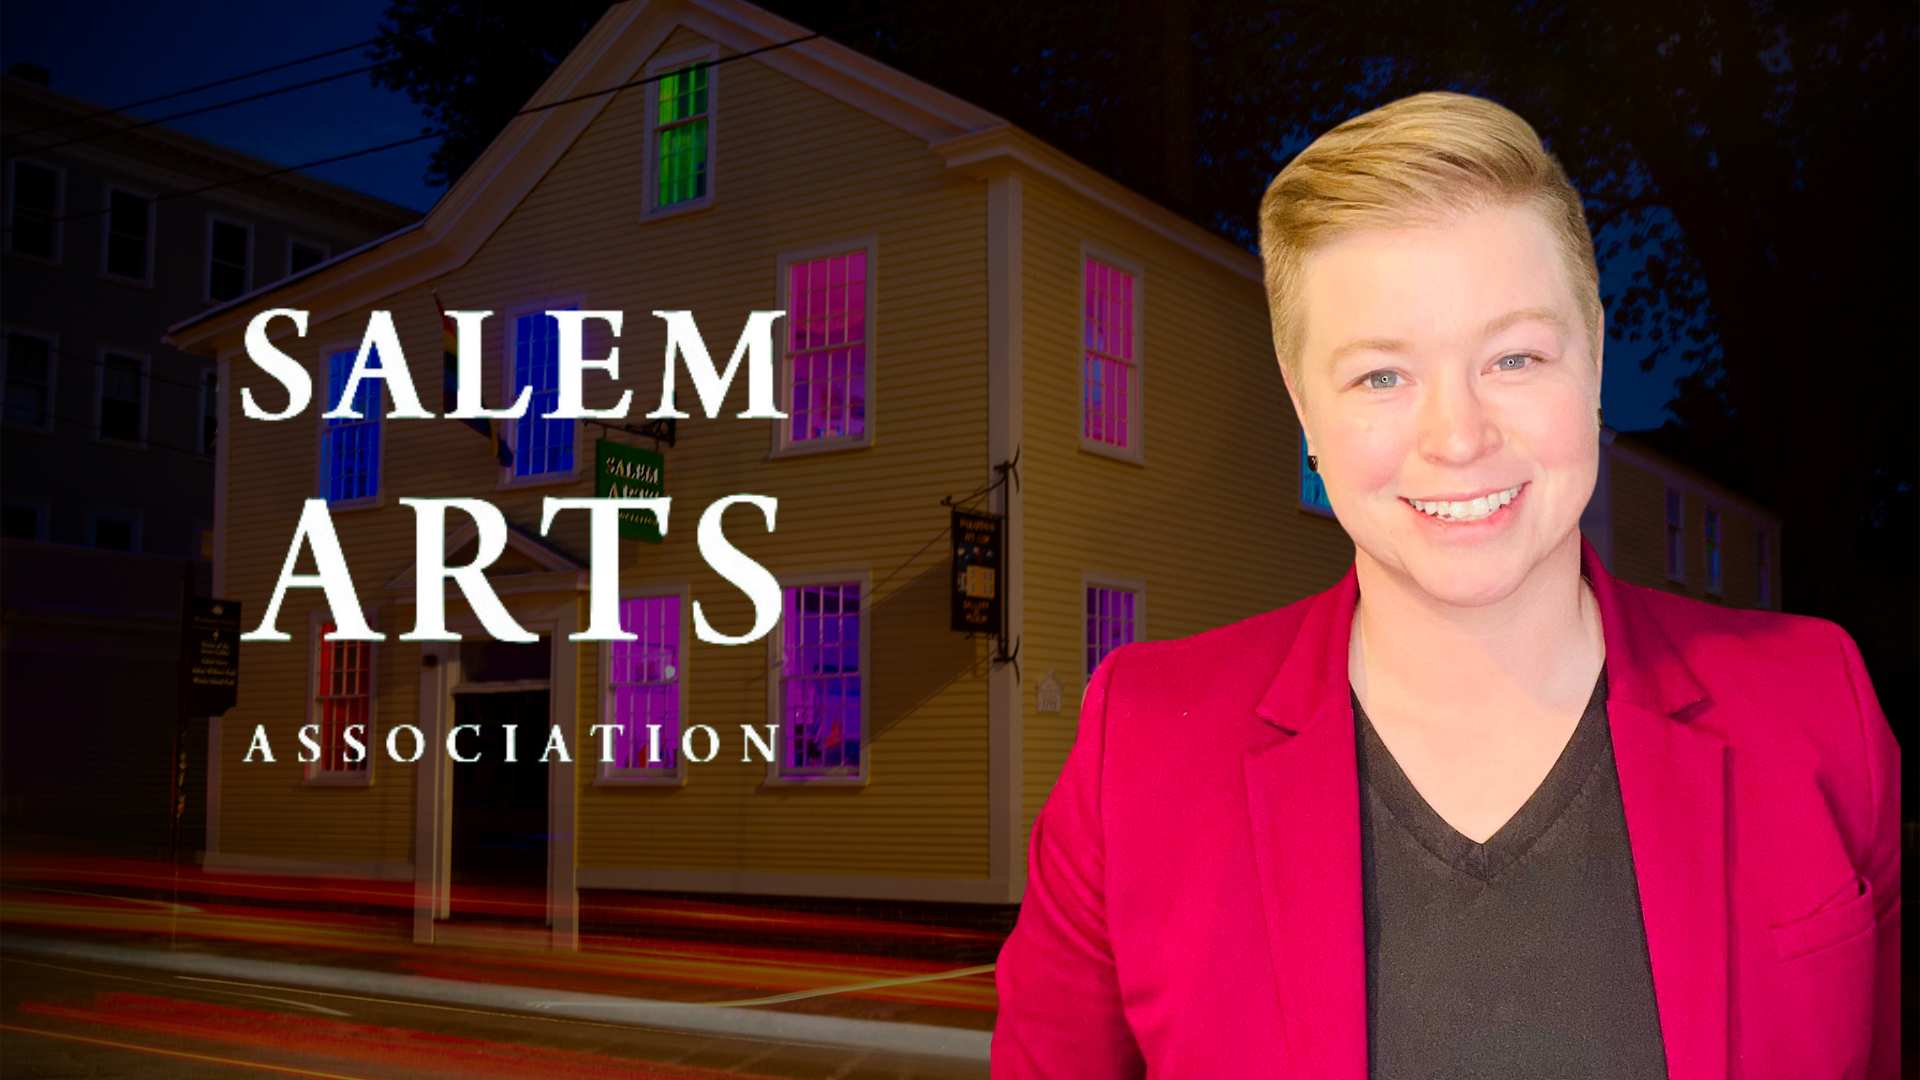 A woman poses by a home prominently displaying the "Salem Arts Association" sign.